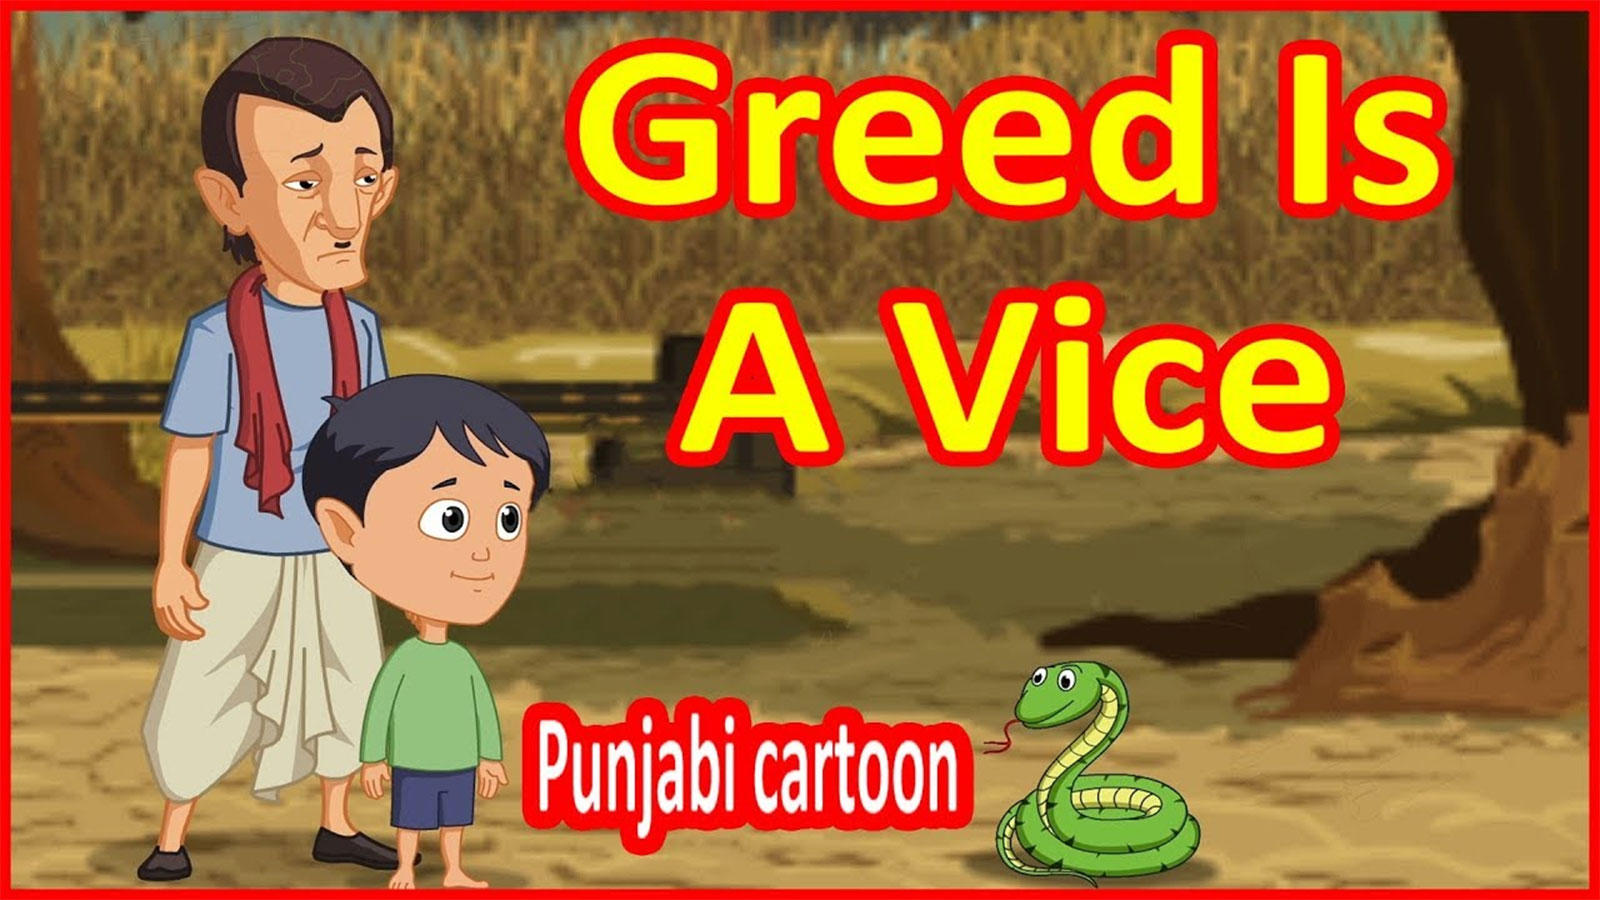 Most Popular 'Kids' Shows In English - 'Greed Is A Vice' | Videos For Kids  | Kids Cartoons | Cartoon Animation For Children | Entertainment - Times of  India Videos